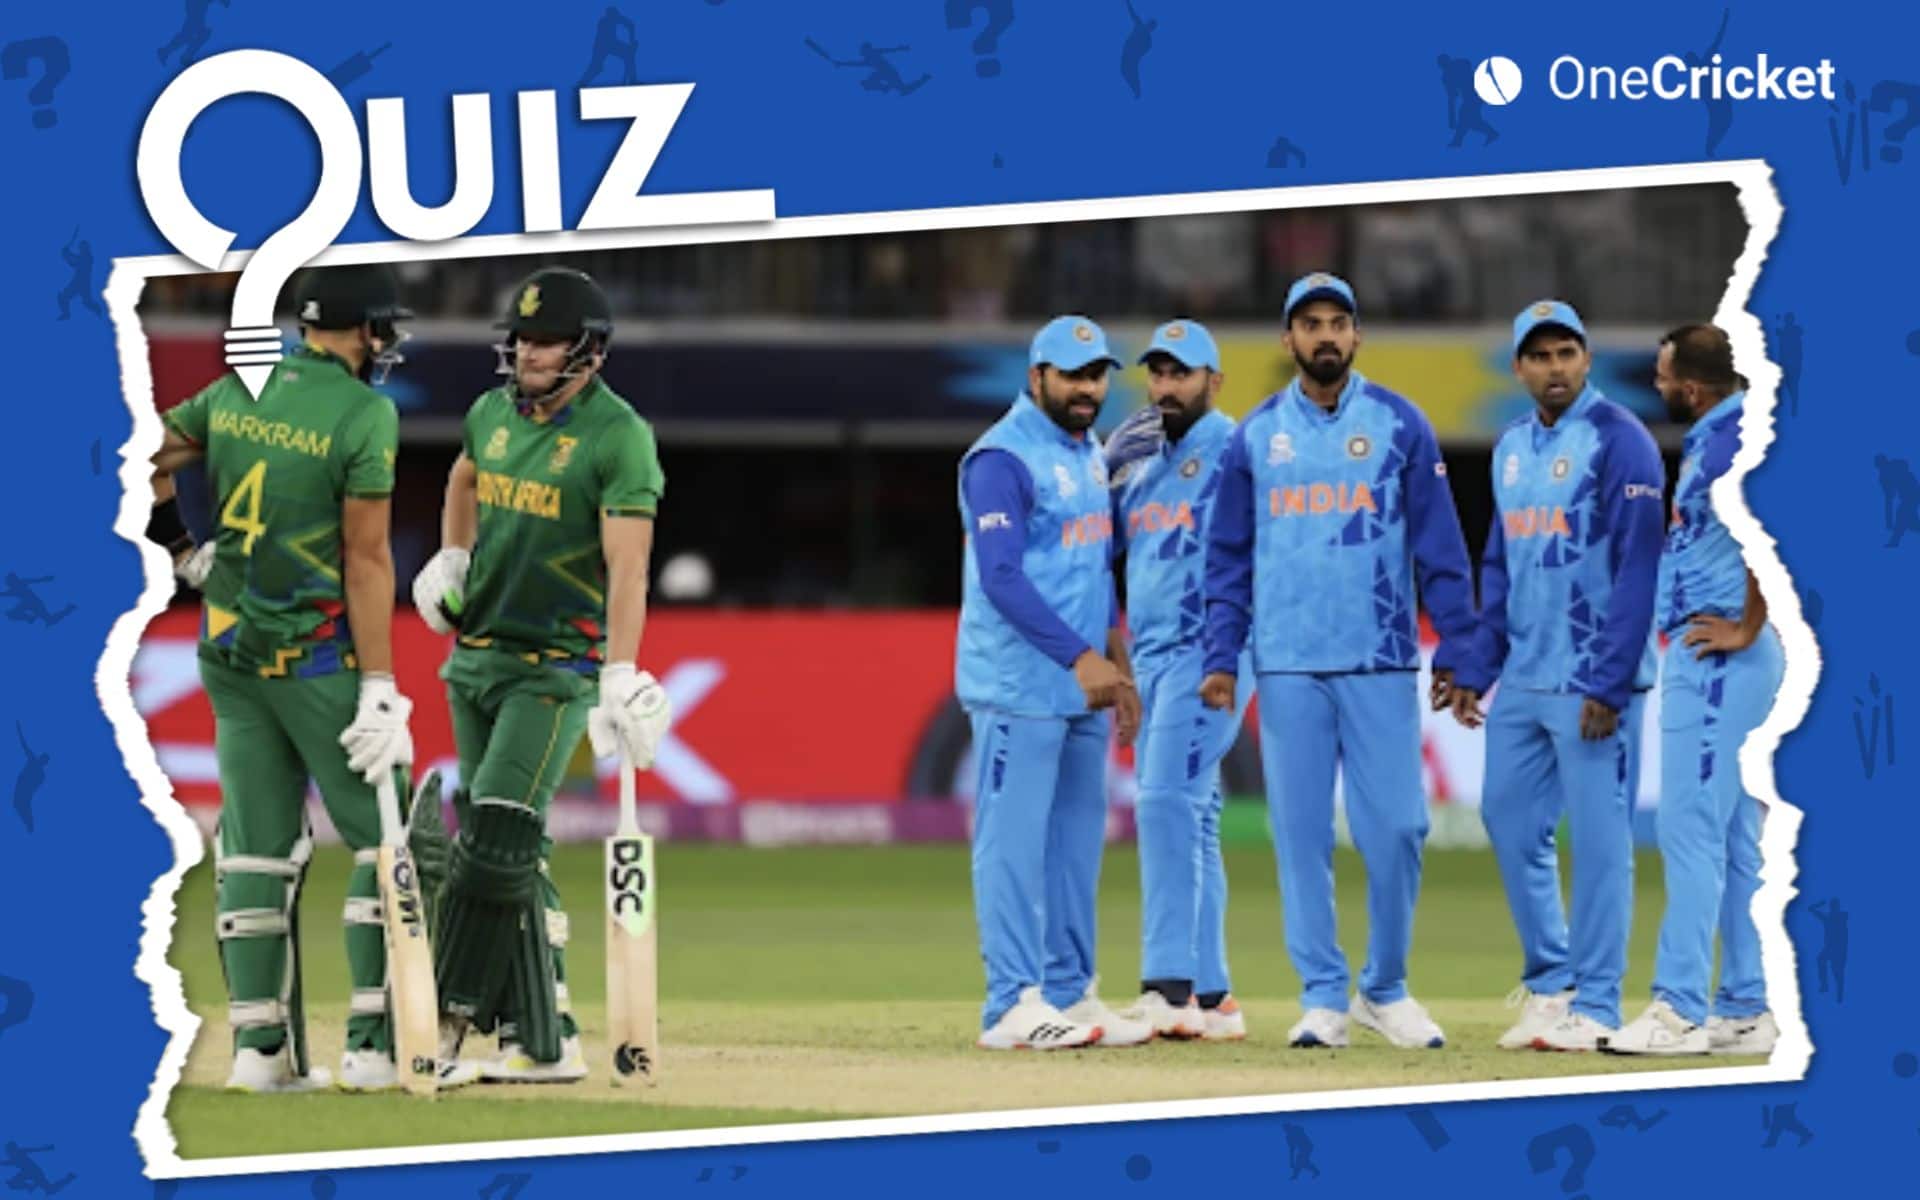 How Good Is Your Knowledge About India, South Africa, And T20 World Cups? Test Your Knowledge Here